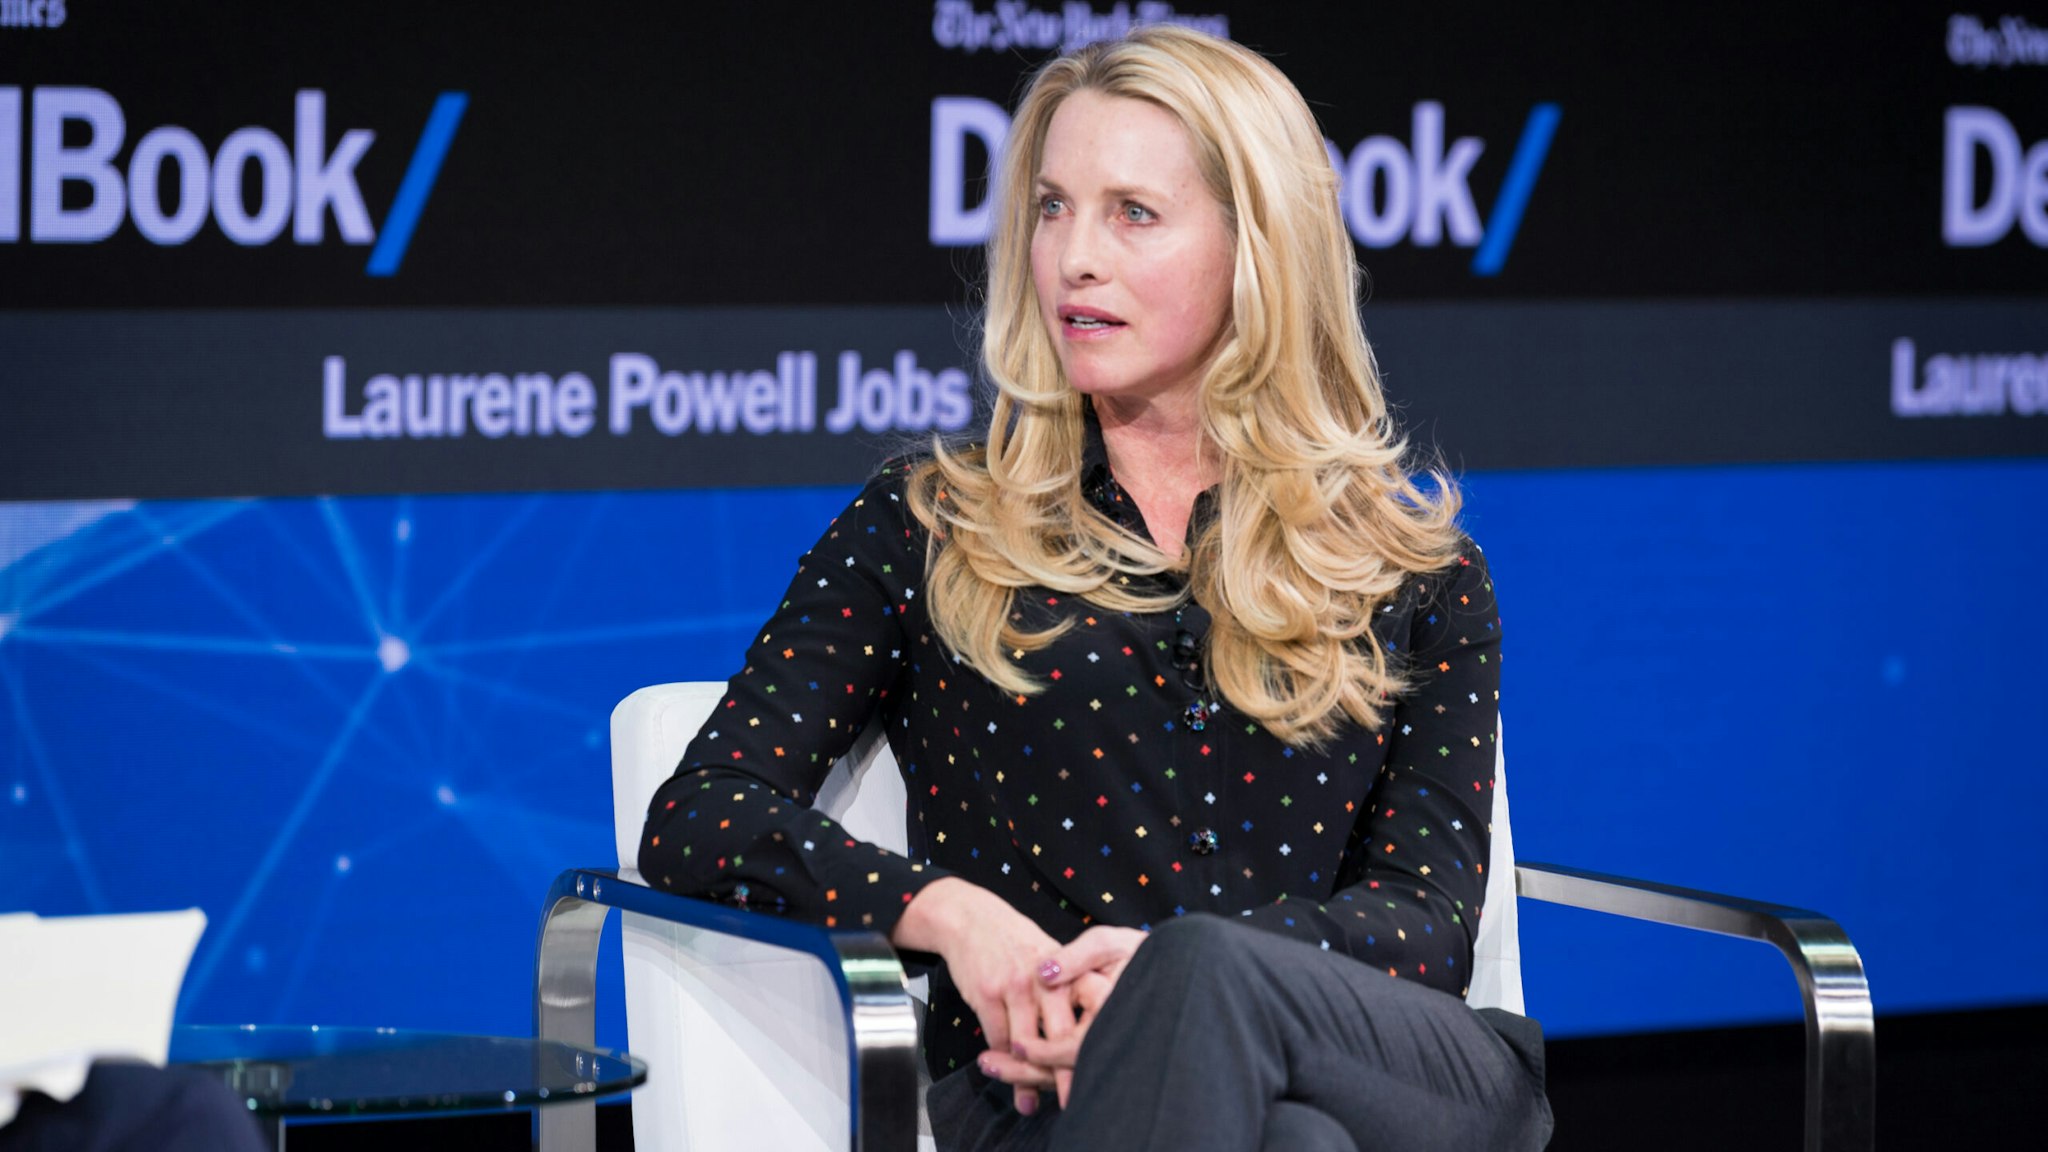 NEW YORK, NY - NOVEMBER 09: Laurene Powell Jobs speaks onstage during The New York Times 2017 DealBook Conference at Jazz at Lincoln Center on November 9, 2017 in New York City.